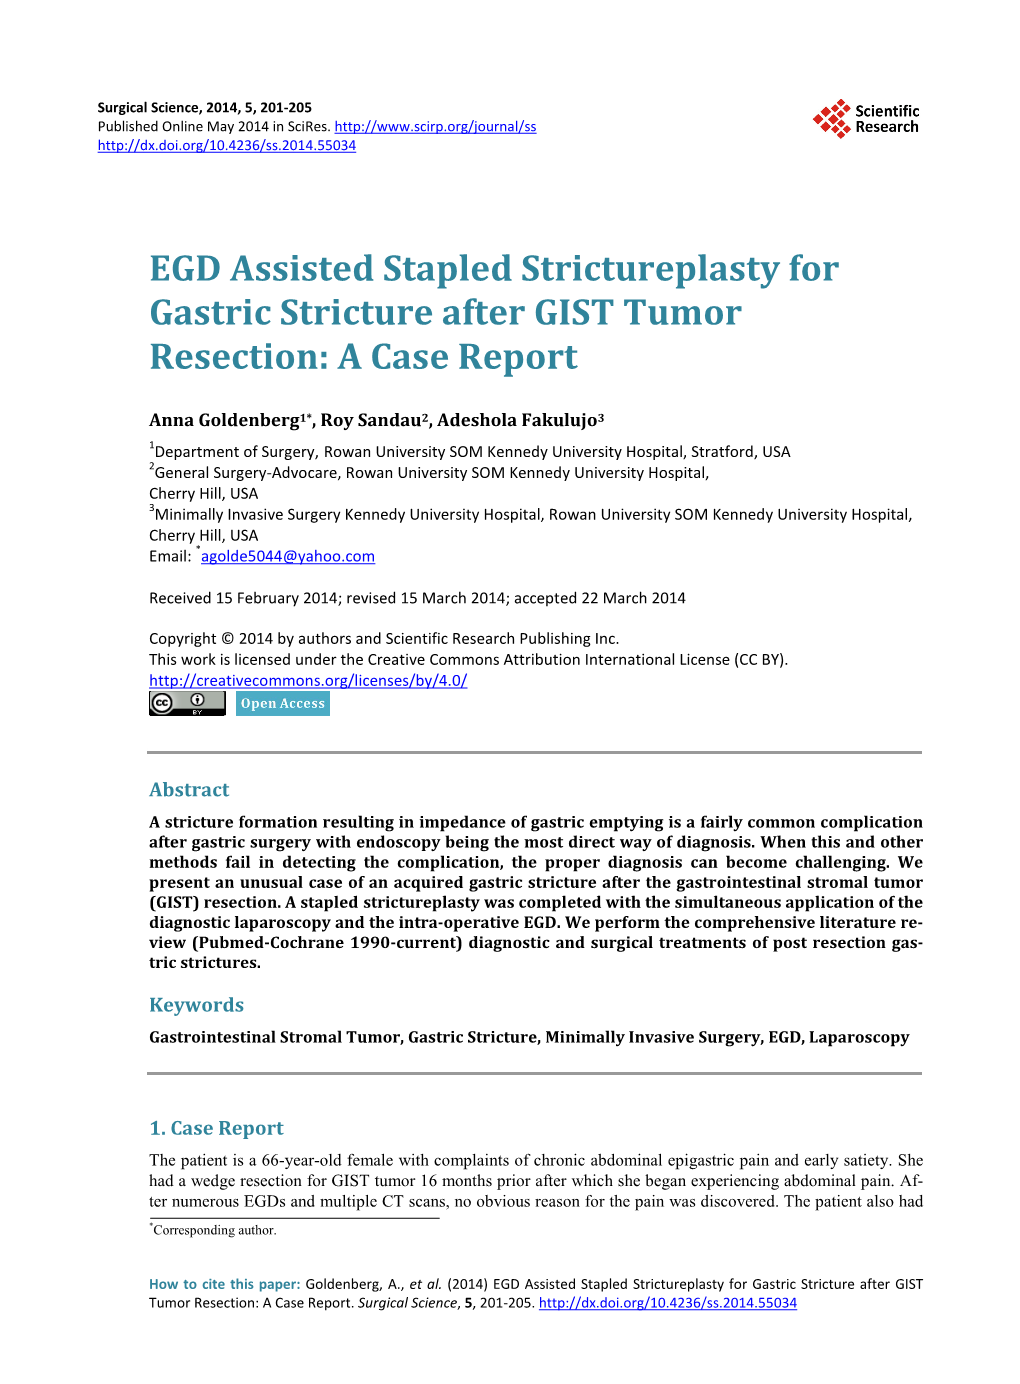 EGD Assisted Stapled Strictureplasty for Gastric Stricture After GIST Tumor Resection: a Case Report